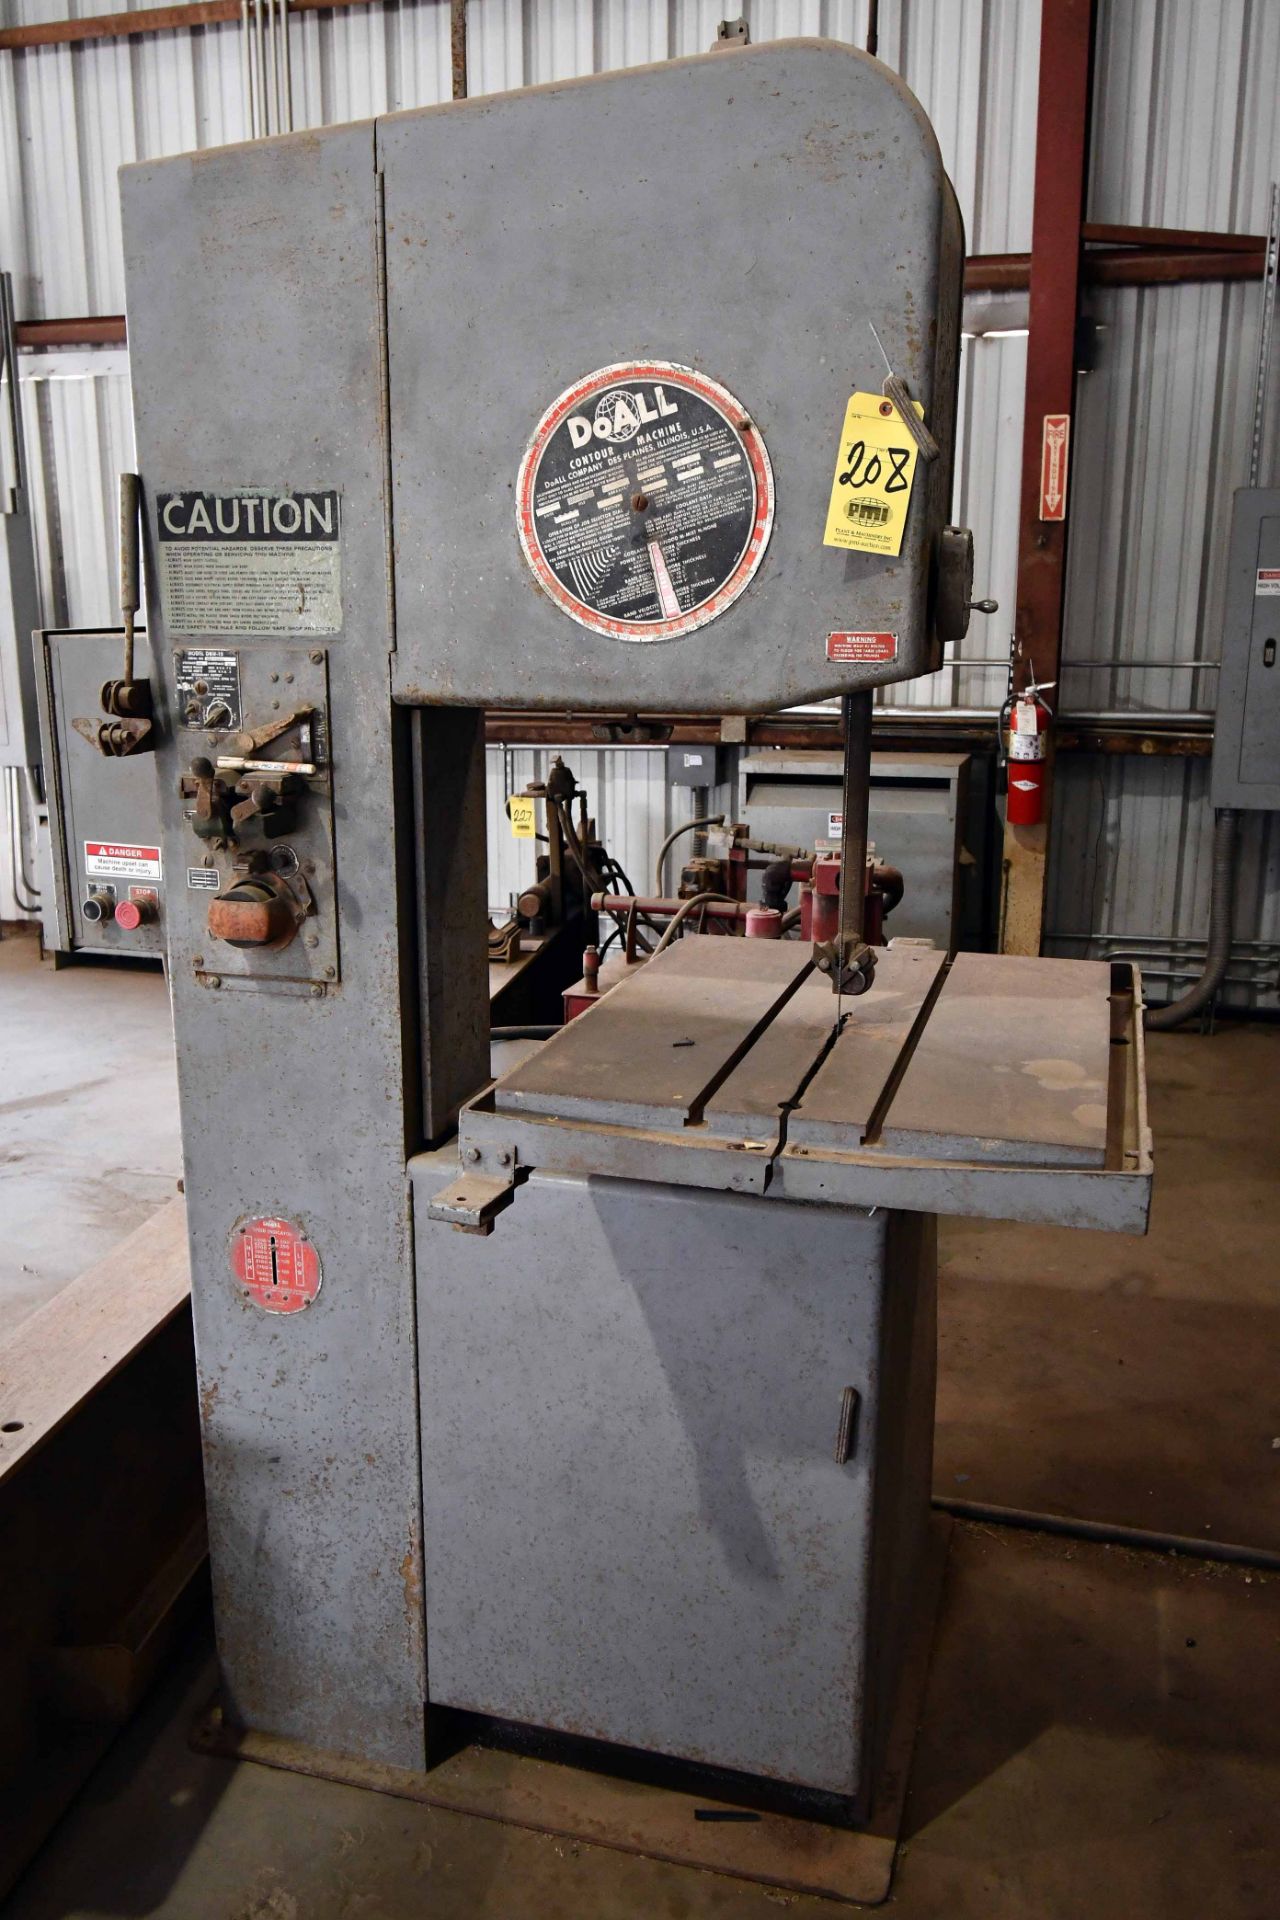 VERTICAL BANDSAW, DOALL MDL. 2012-1A, 24” x 30-1/2” titling table, 154”L. blade, 20” throat, S/N